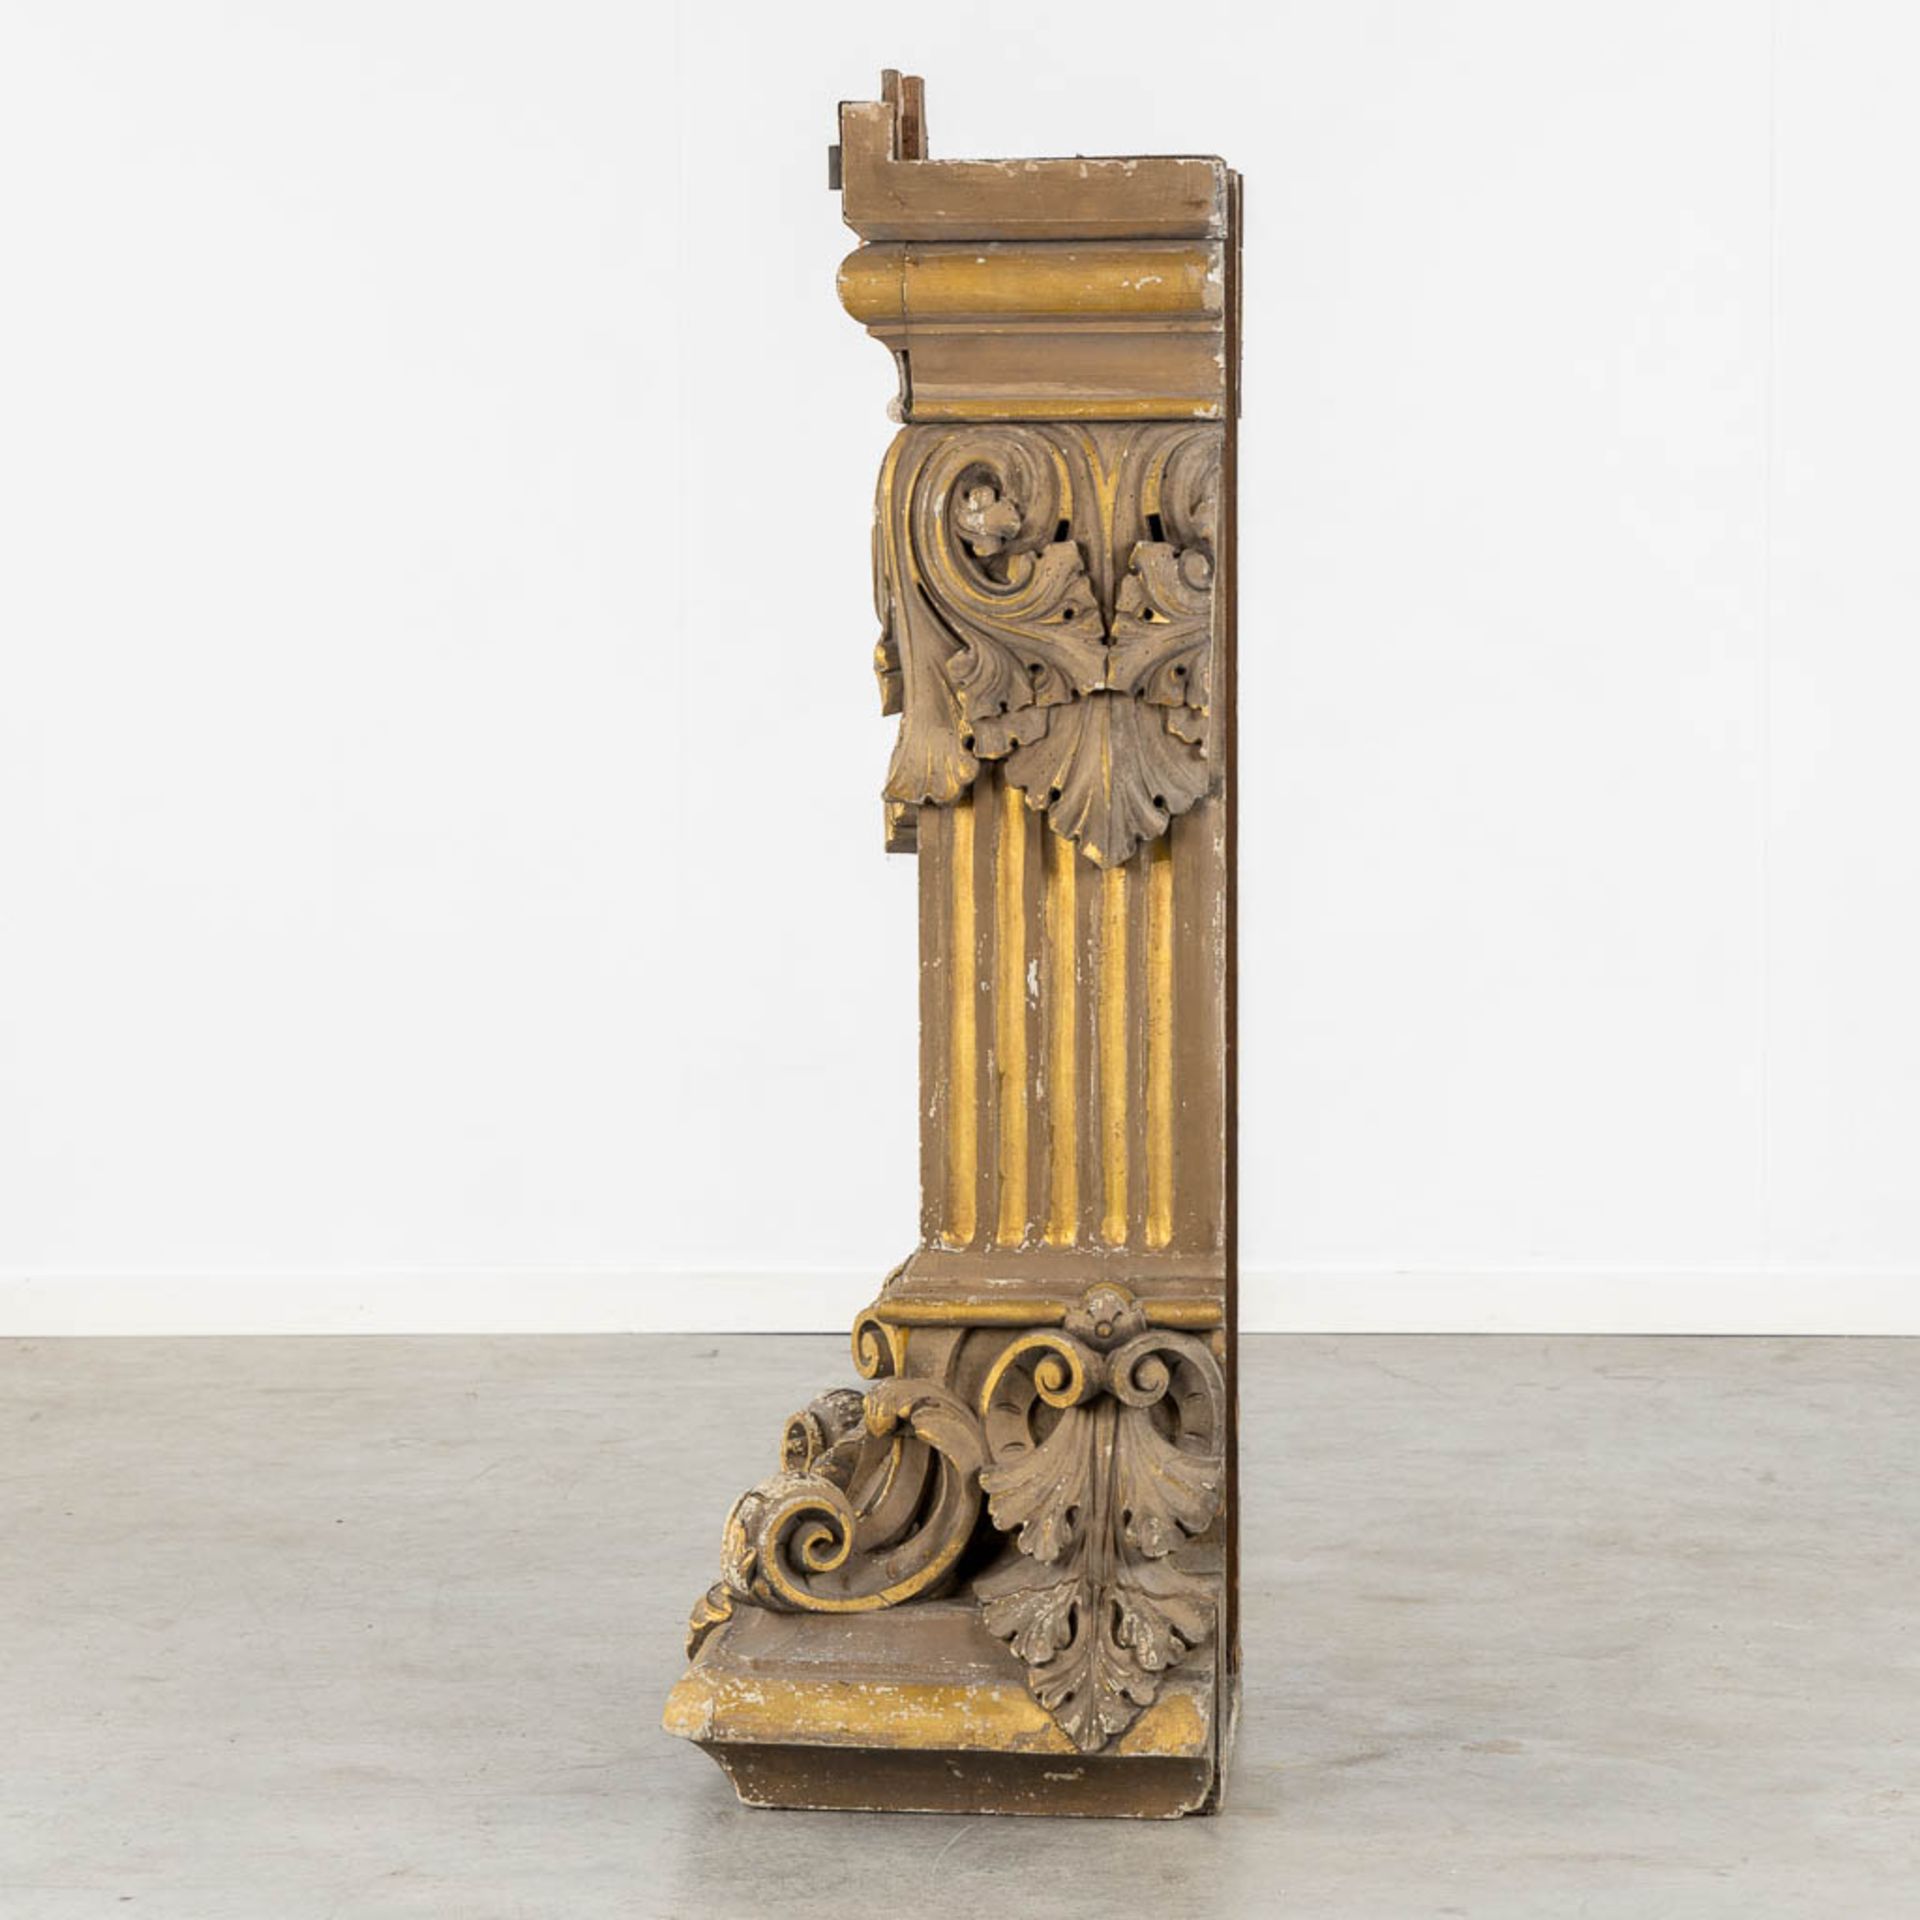 A richly gilt and woodsculptured pedestal with an ionic capitel. Circa 1900. (L:44 x W:60 x H:130 cm - Image 5 of 14